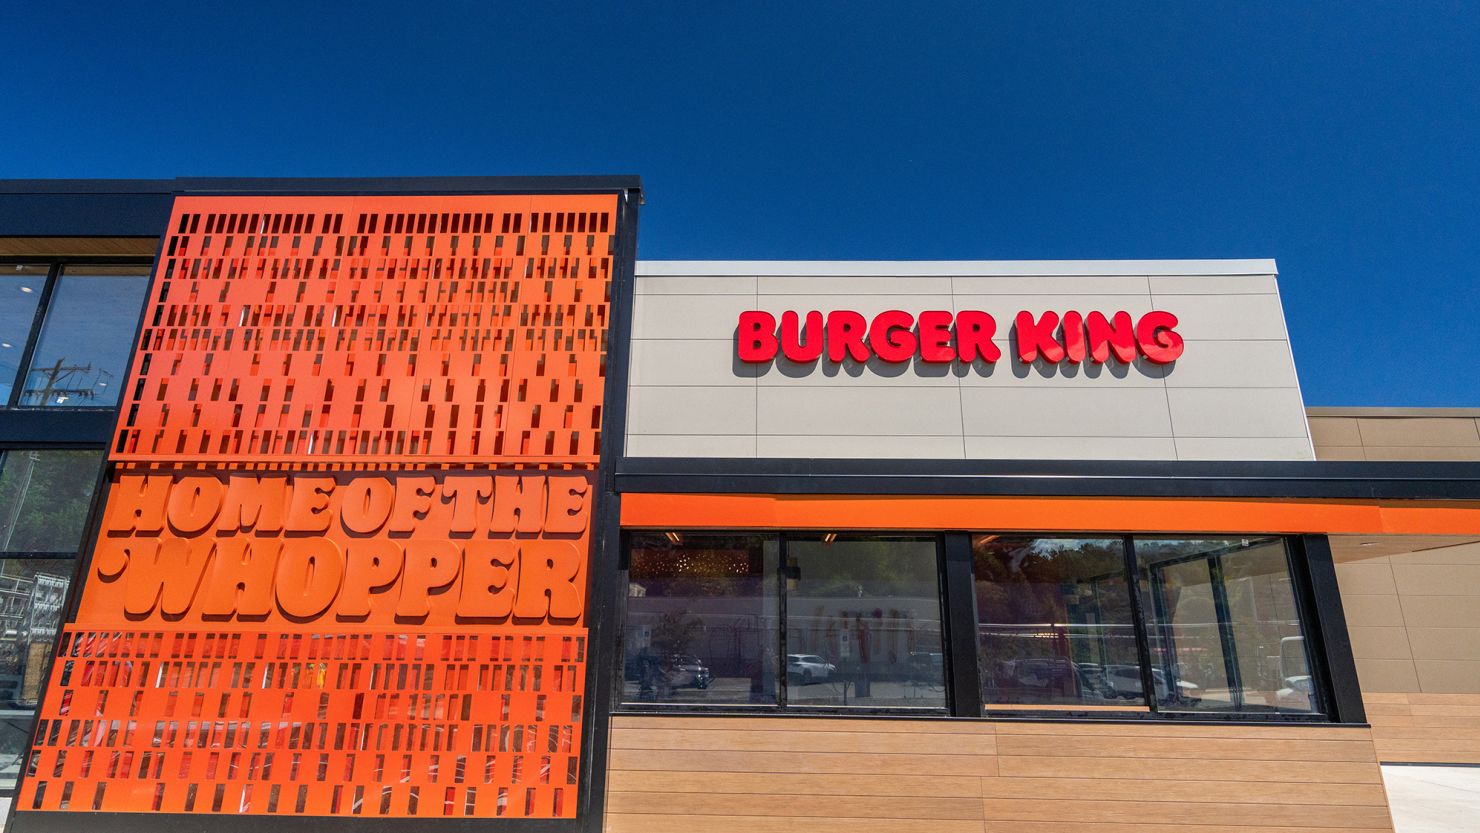 Burger King's new store design, Sizzle, features lots of Whopper branding.